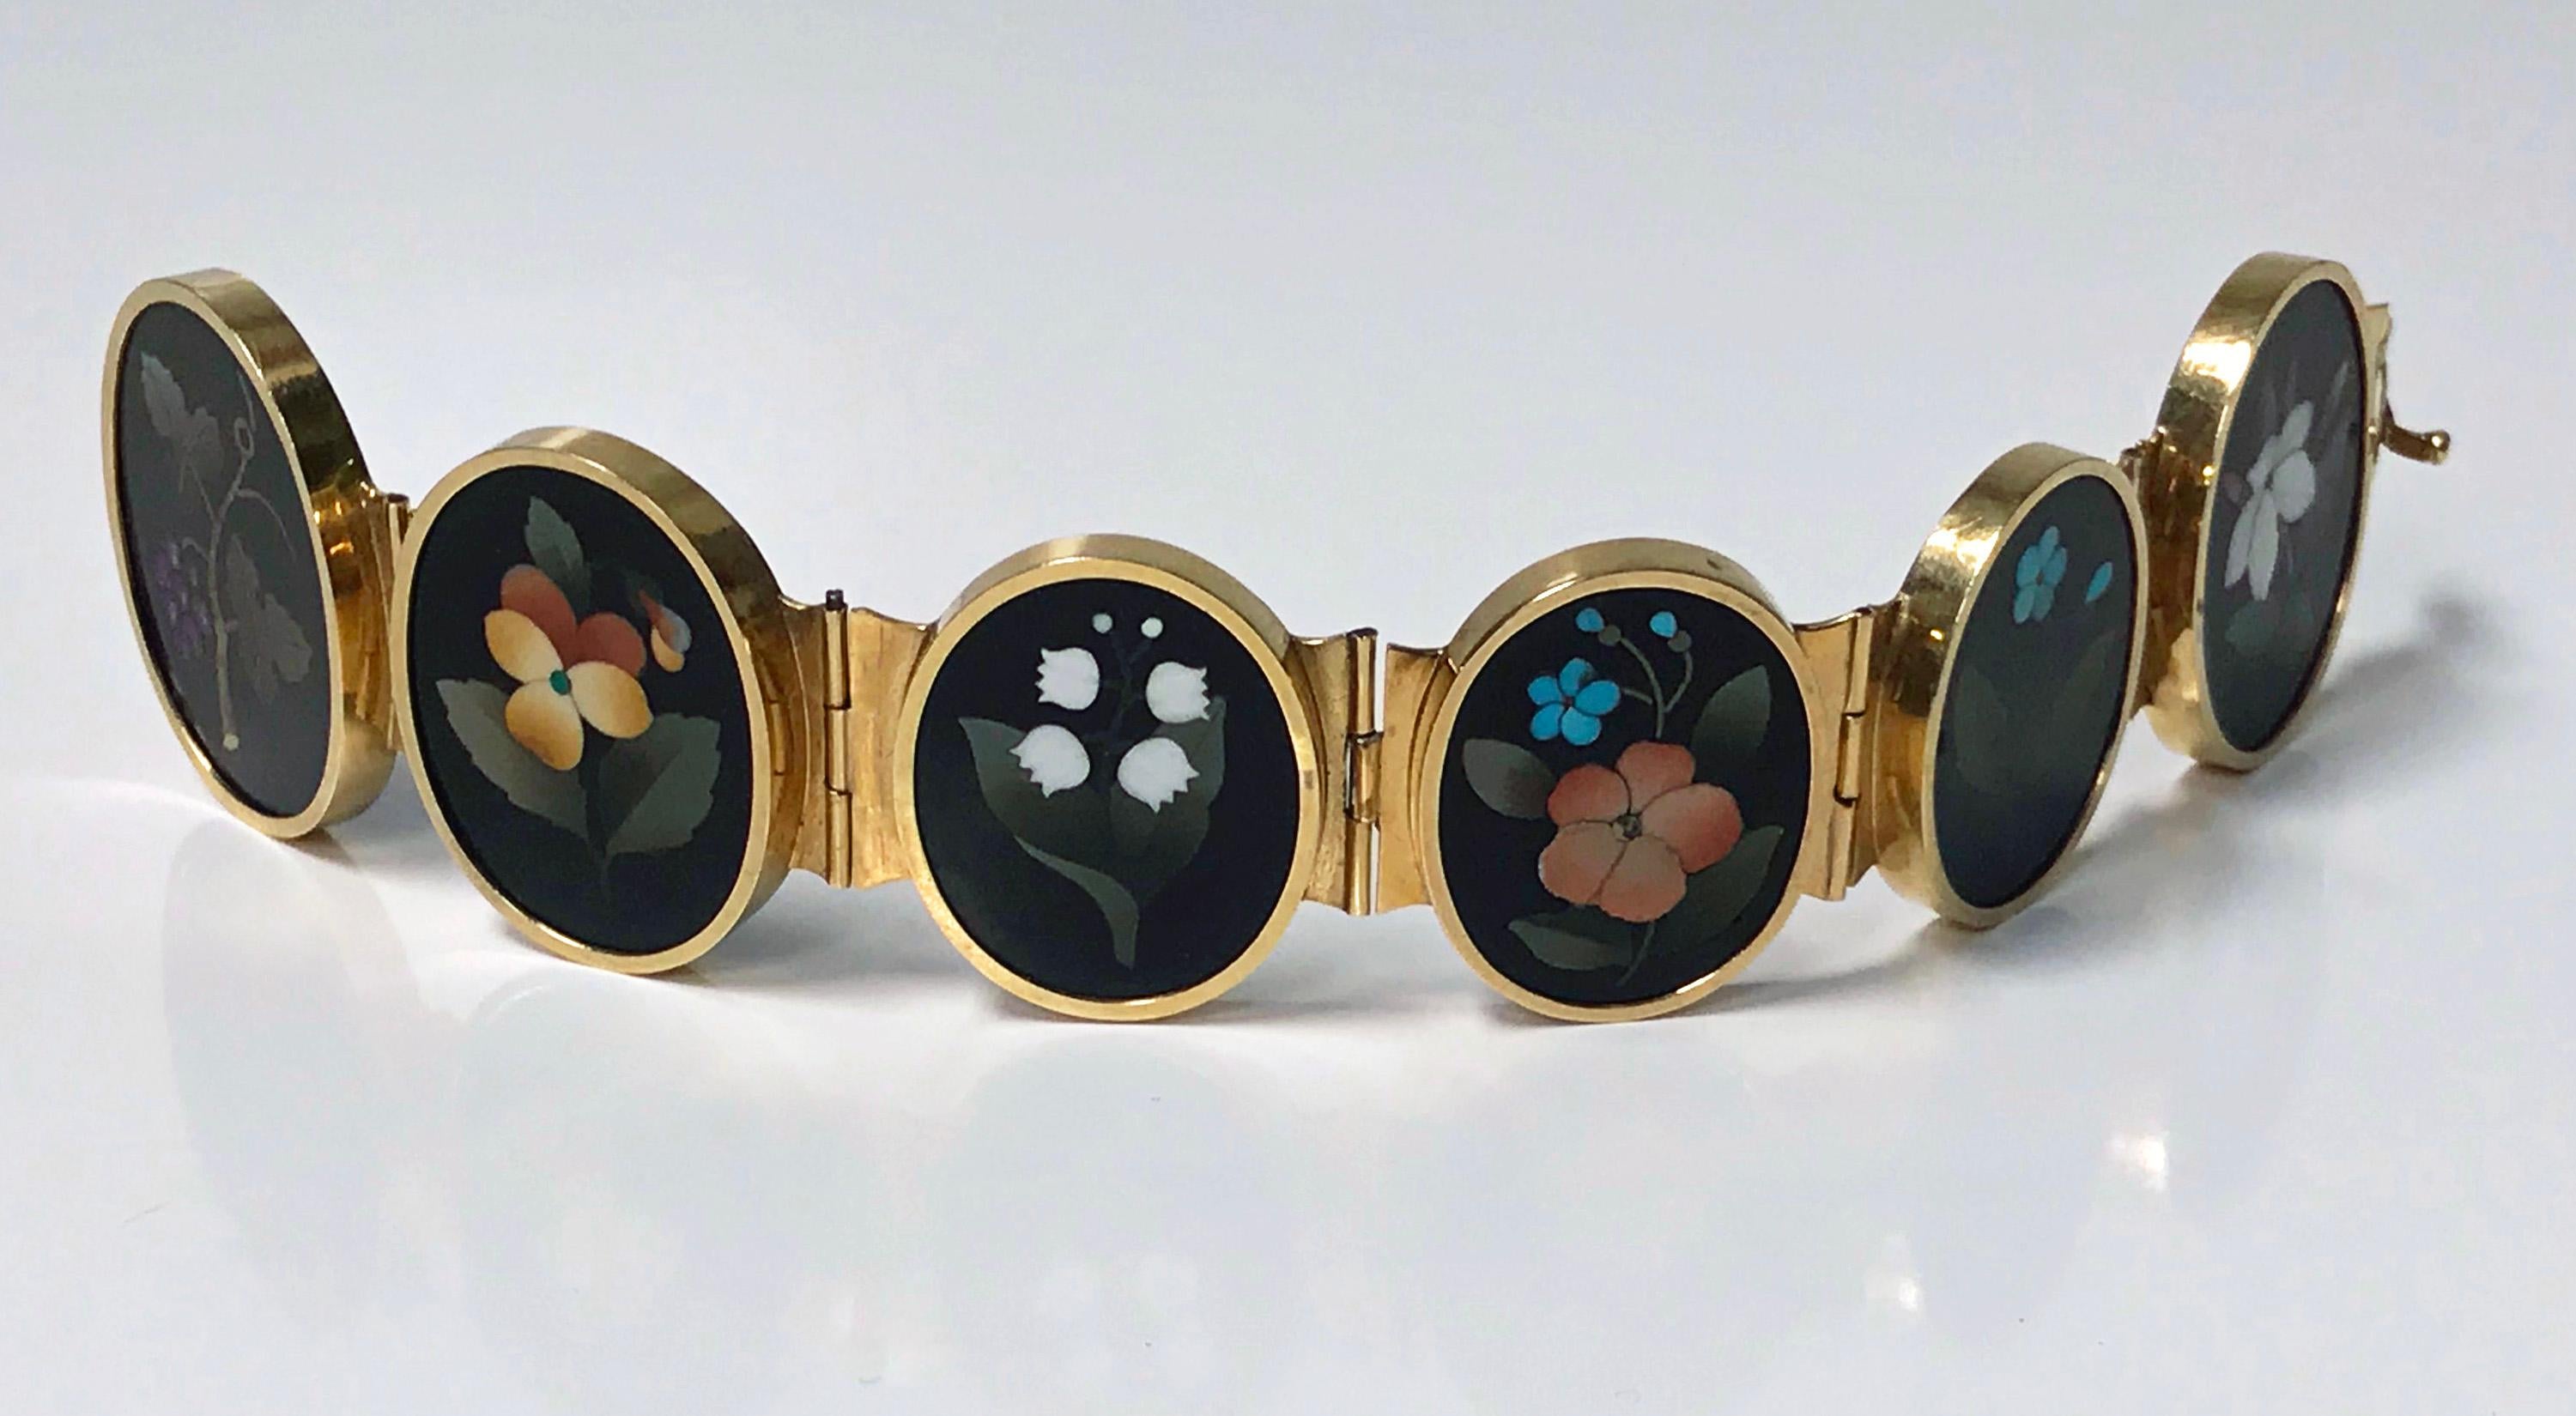 Very Fine 19th century 18K (tested) Gold Pietra Dura Bracelet, Italy C.1875. The bracelet with six slightly graduated oval bezel set pietra dura depicting foliage, berries and flowers, hinged gold links between, terminating with tongue box clasp